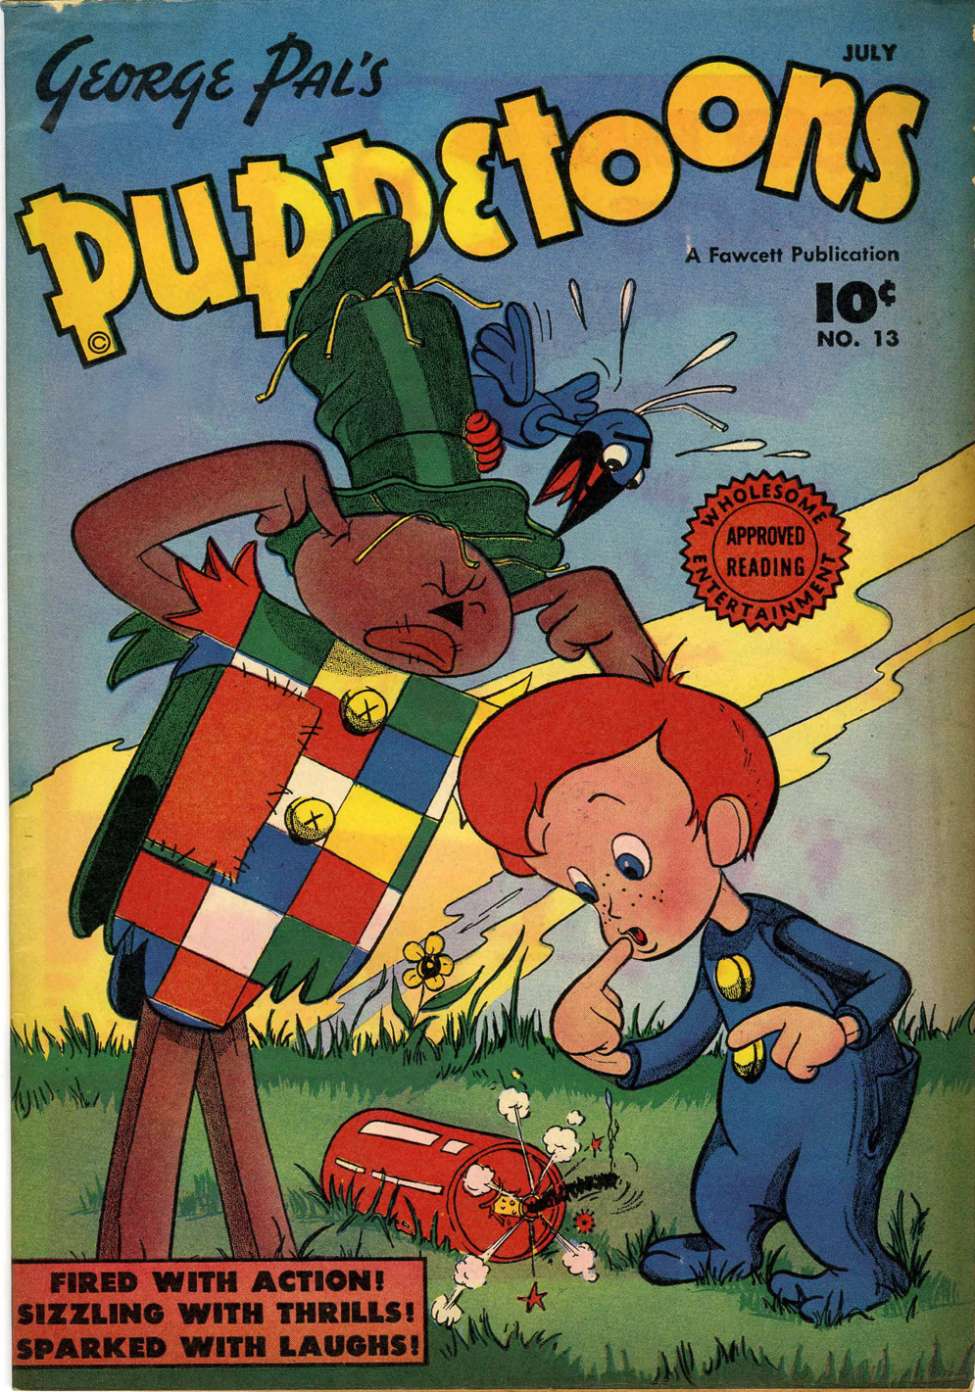 Book Cover For George Pal's Puppetoons 13